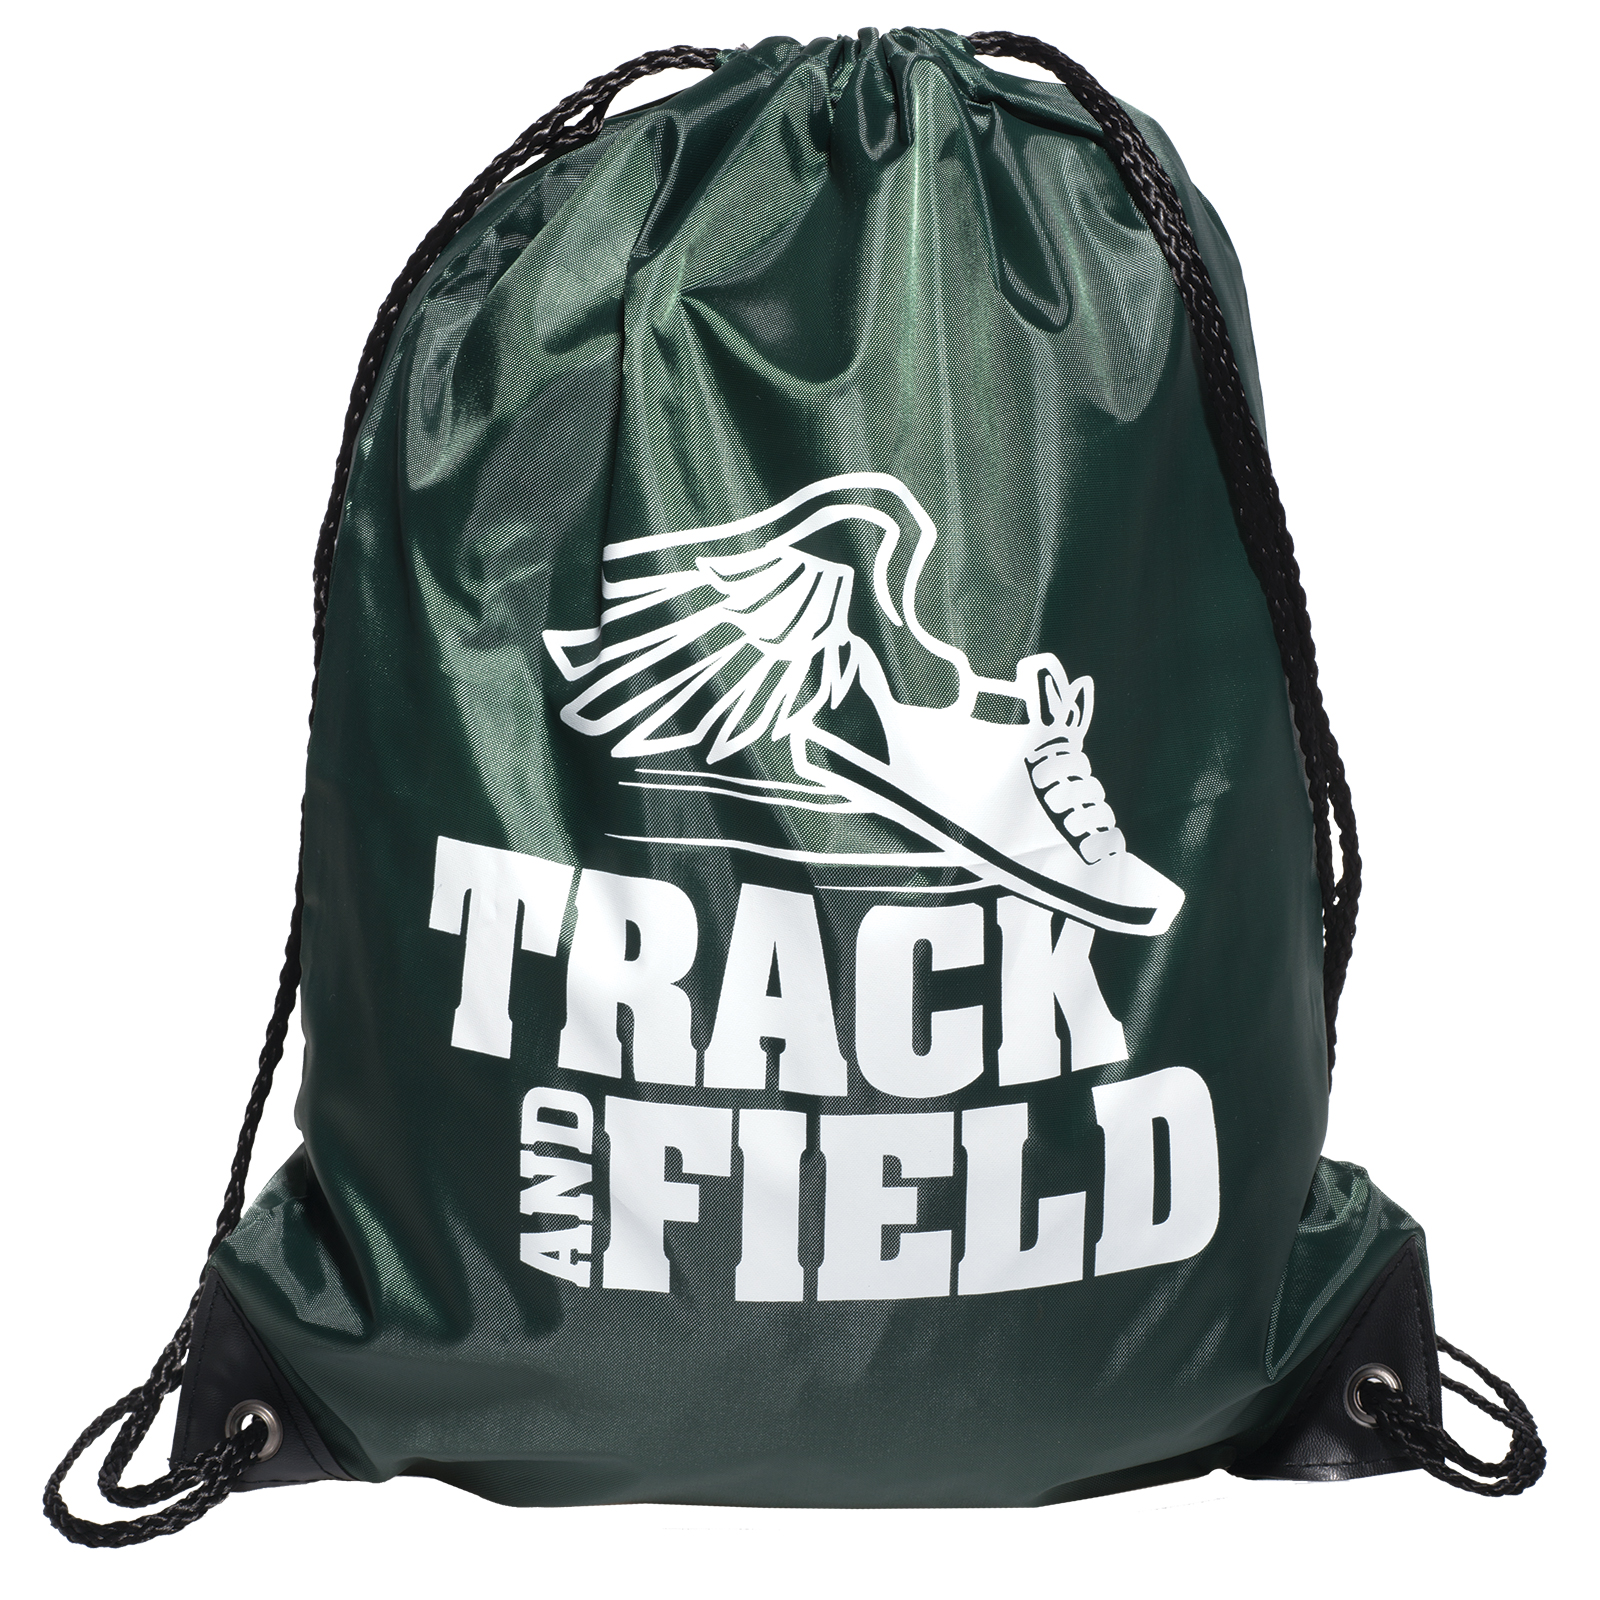 track and field backpack